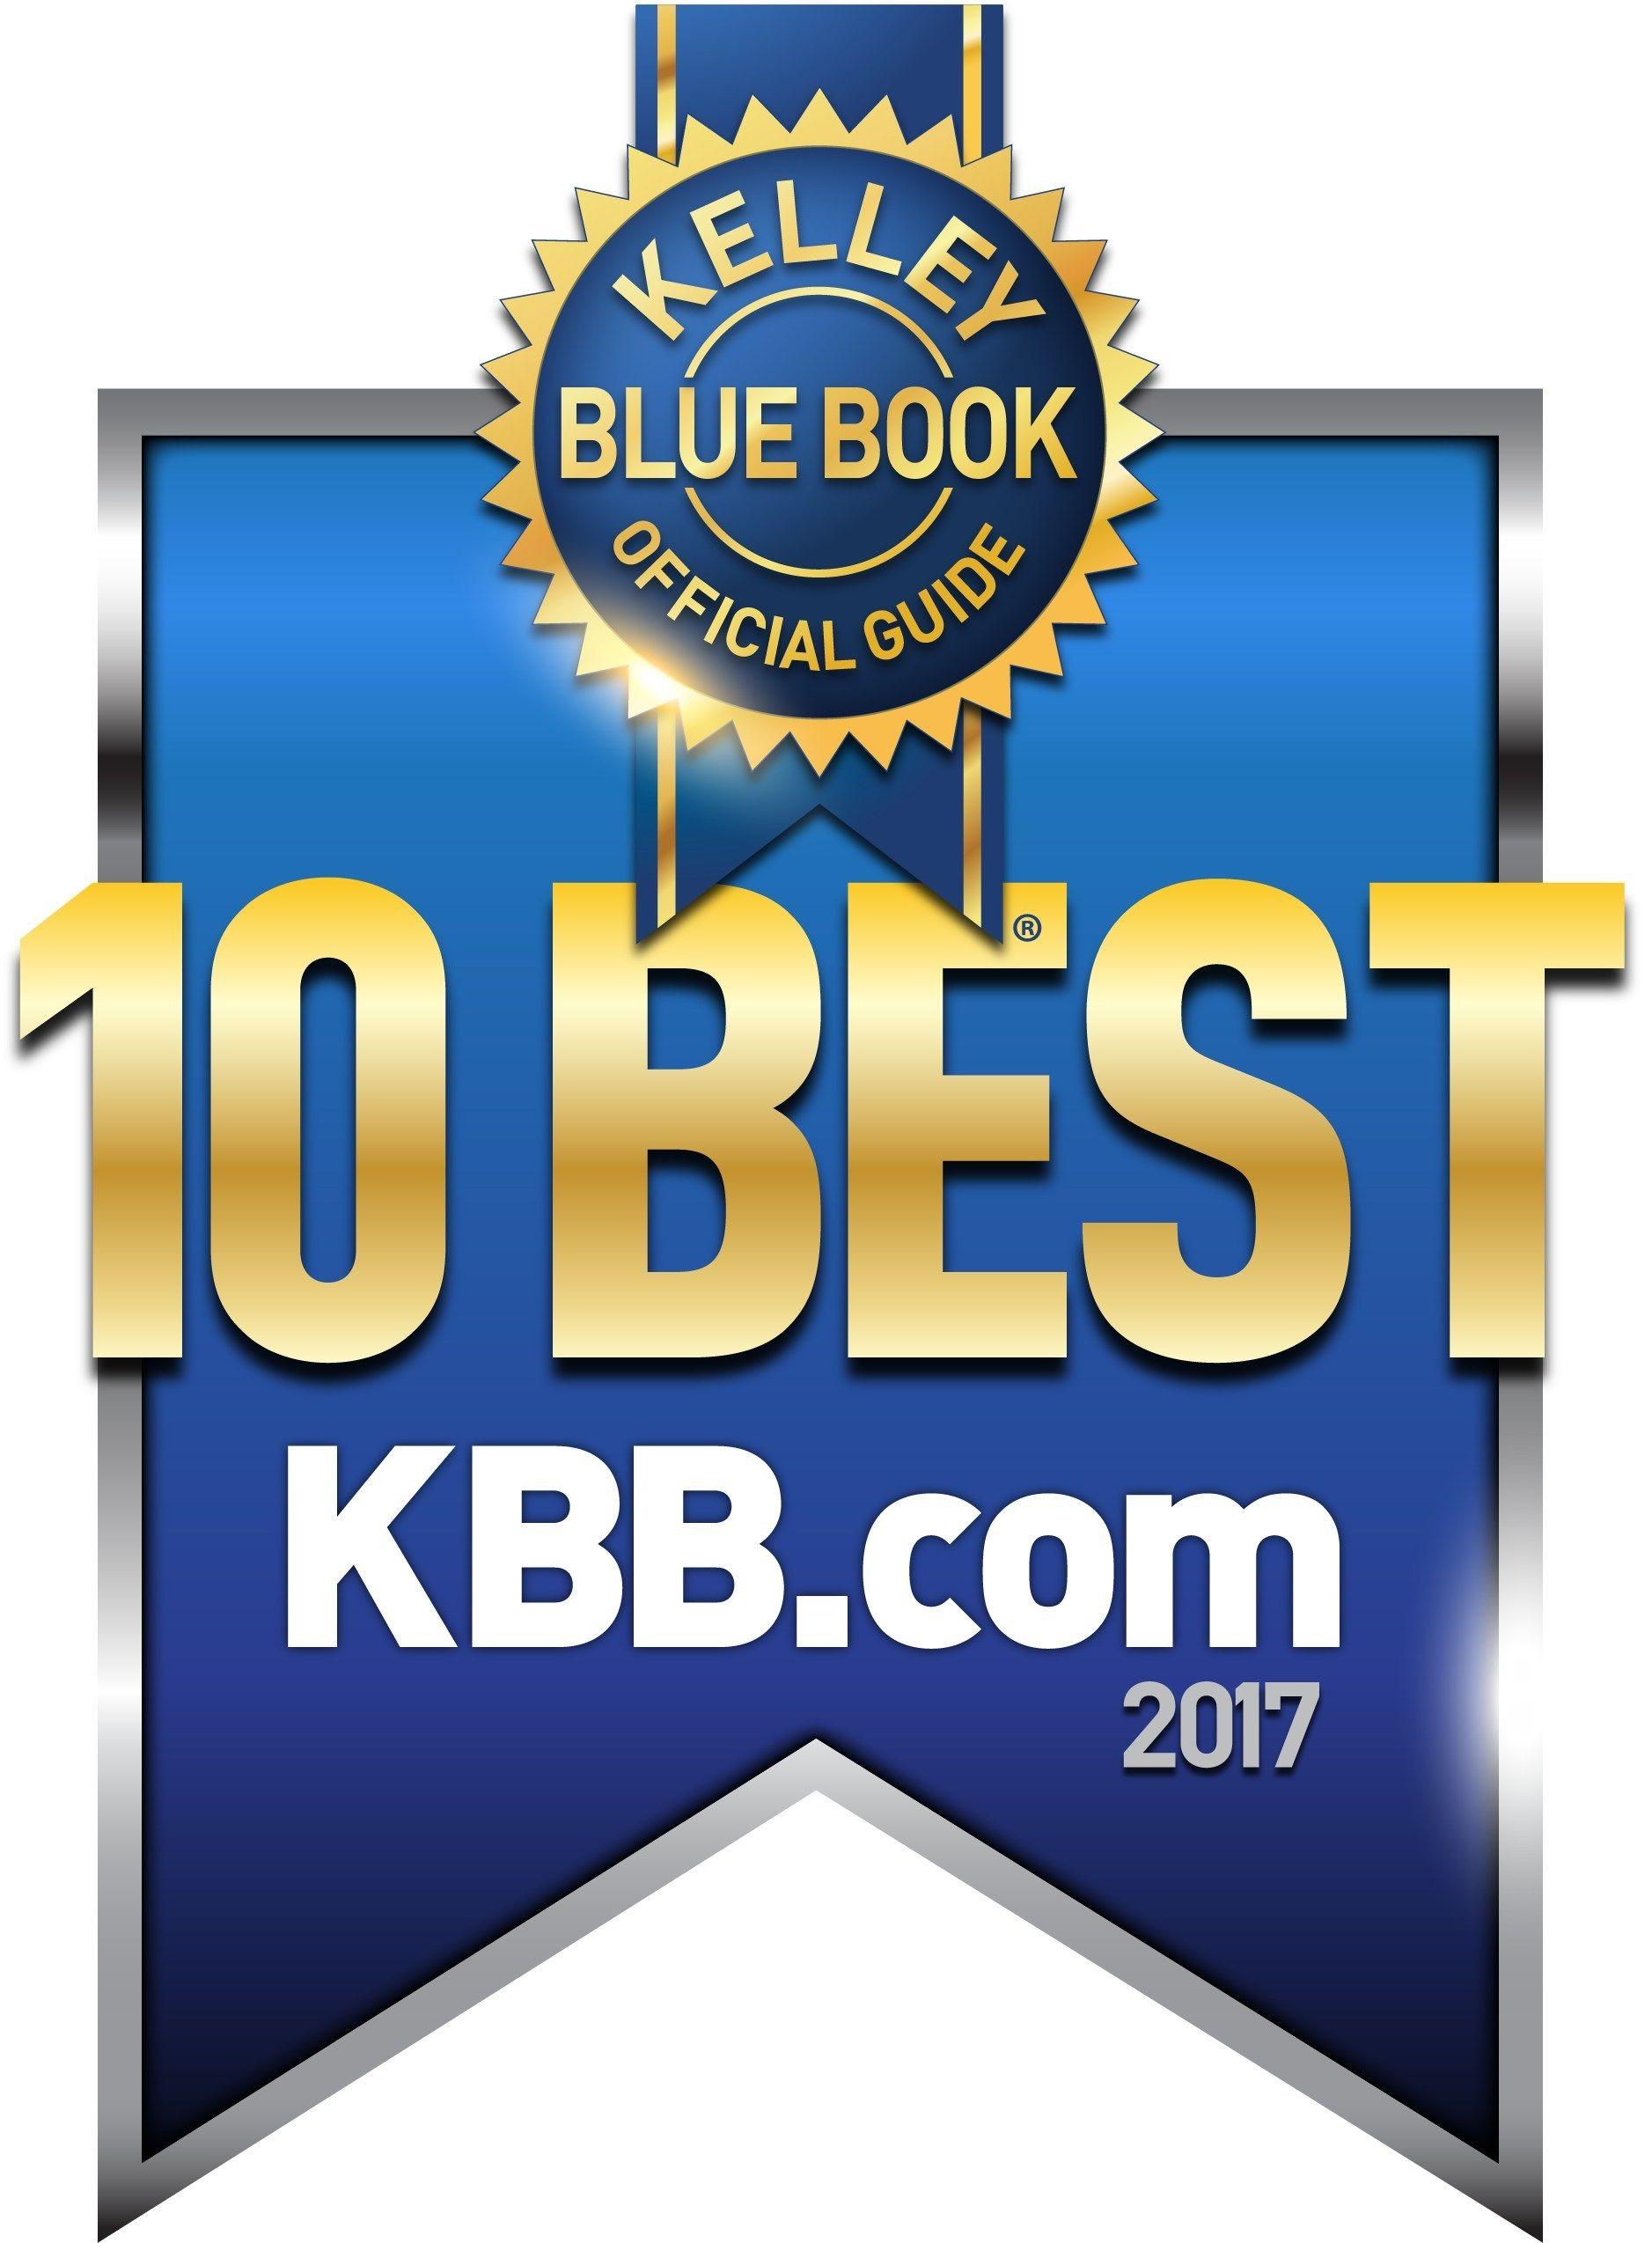 KBB Logo - 10 Most Awarded Cars, Brands of 2017 by Kelley Blue Book's KBB.com ...